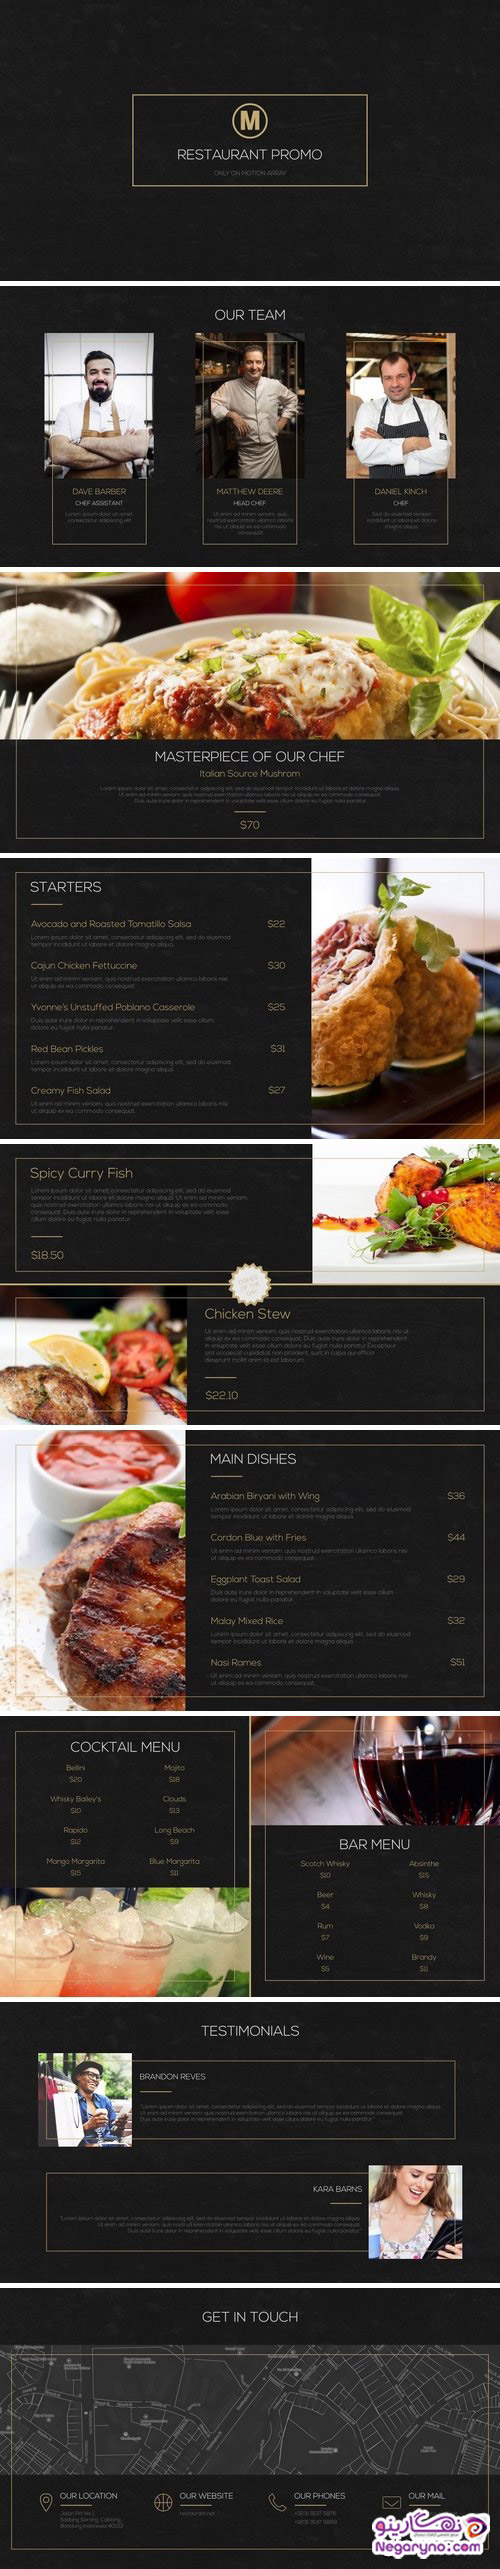 MotionArray---Restaurant-Promo-After-Effects-Templates-61103-c